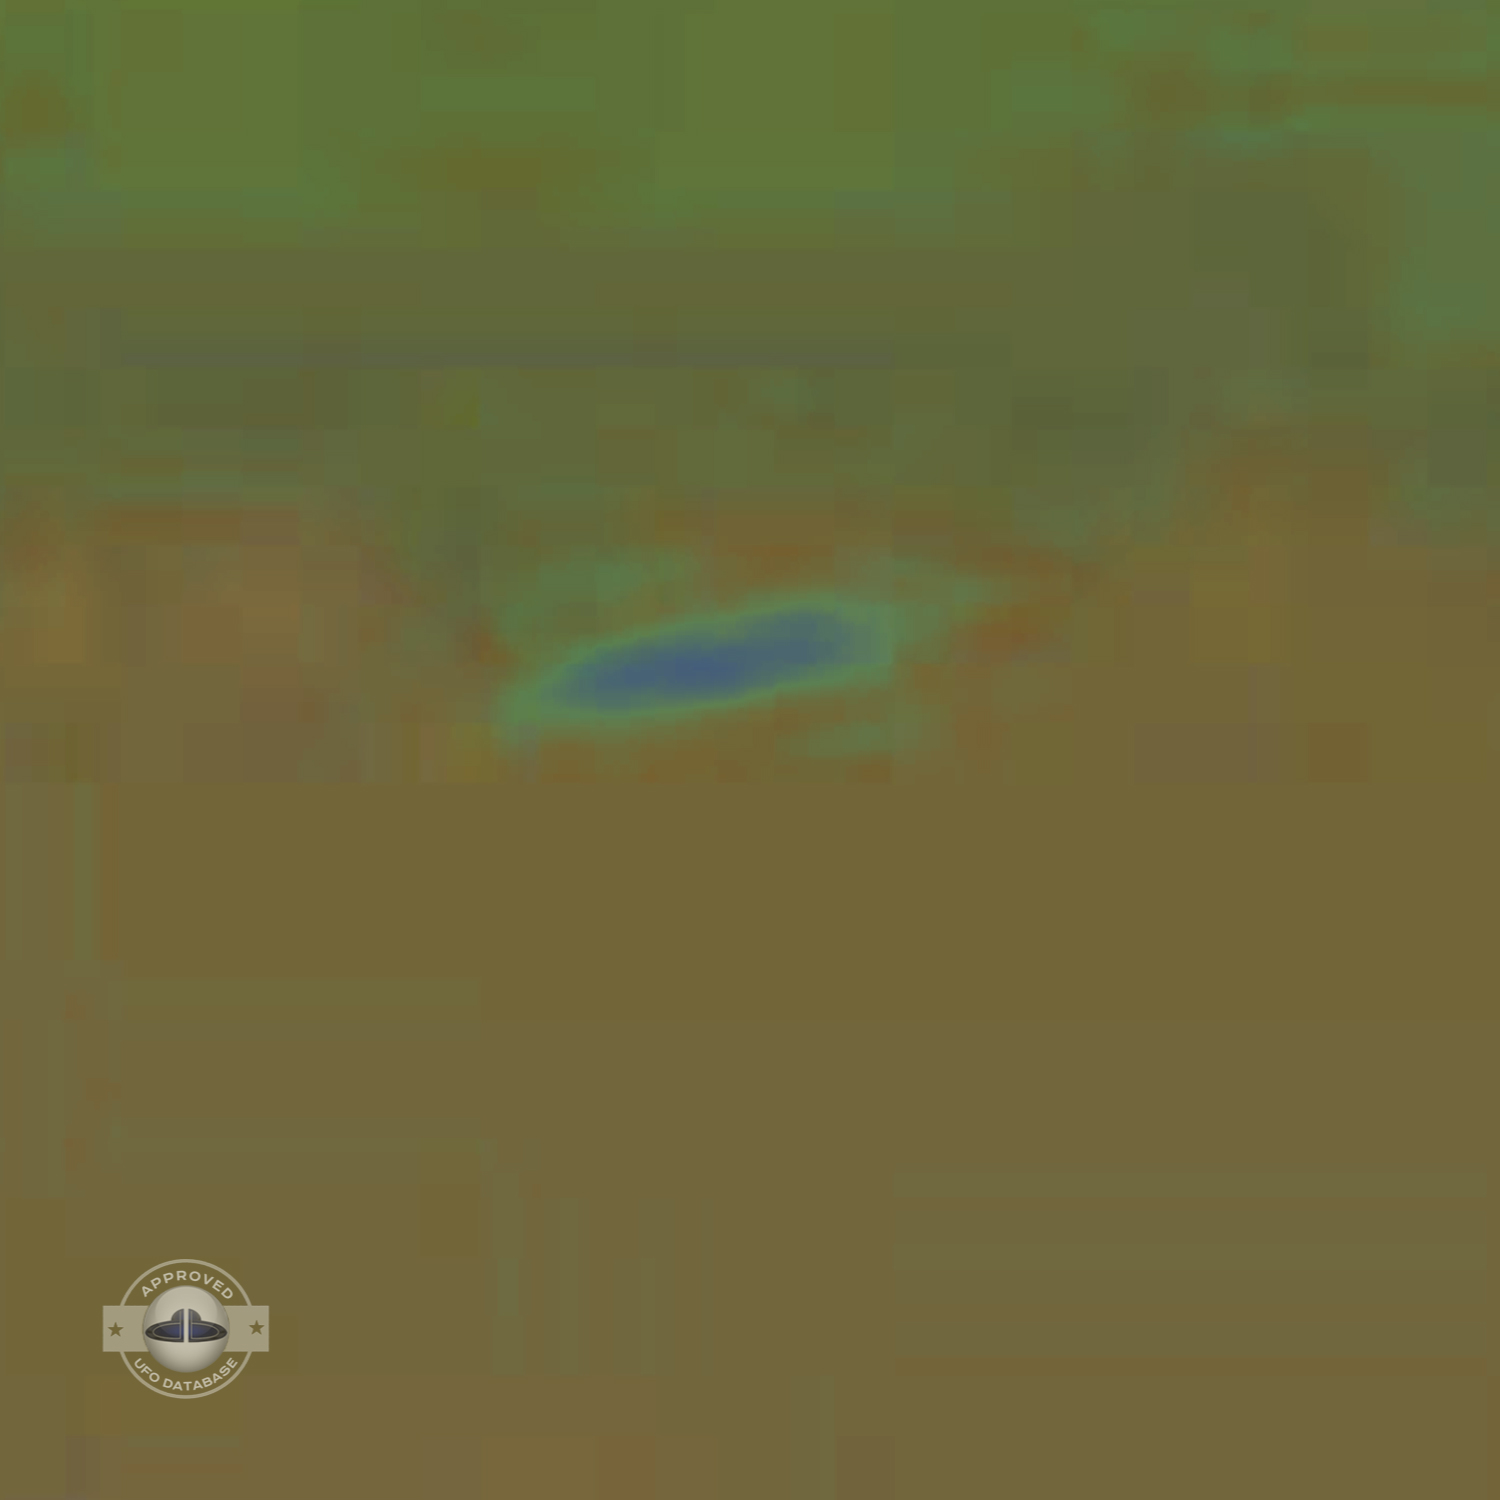 UFO picture taken in the Ica Region of Peru next to the Nazca region UFO Picture #53-7